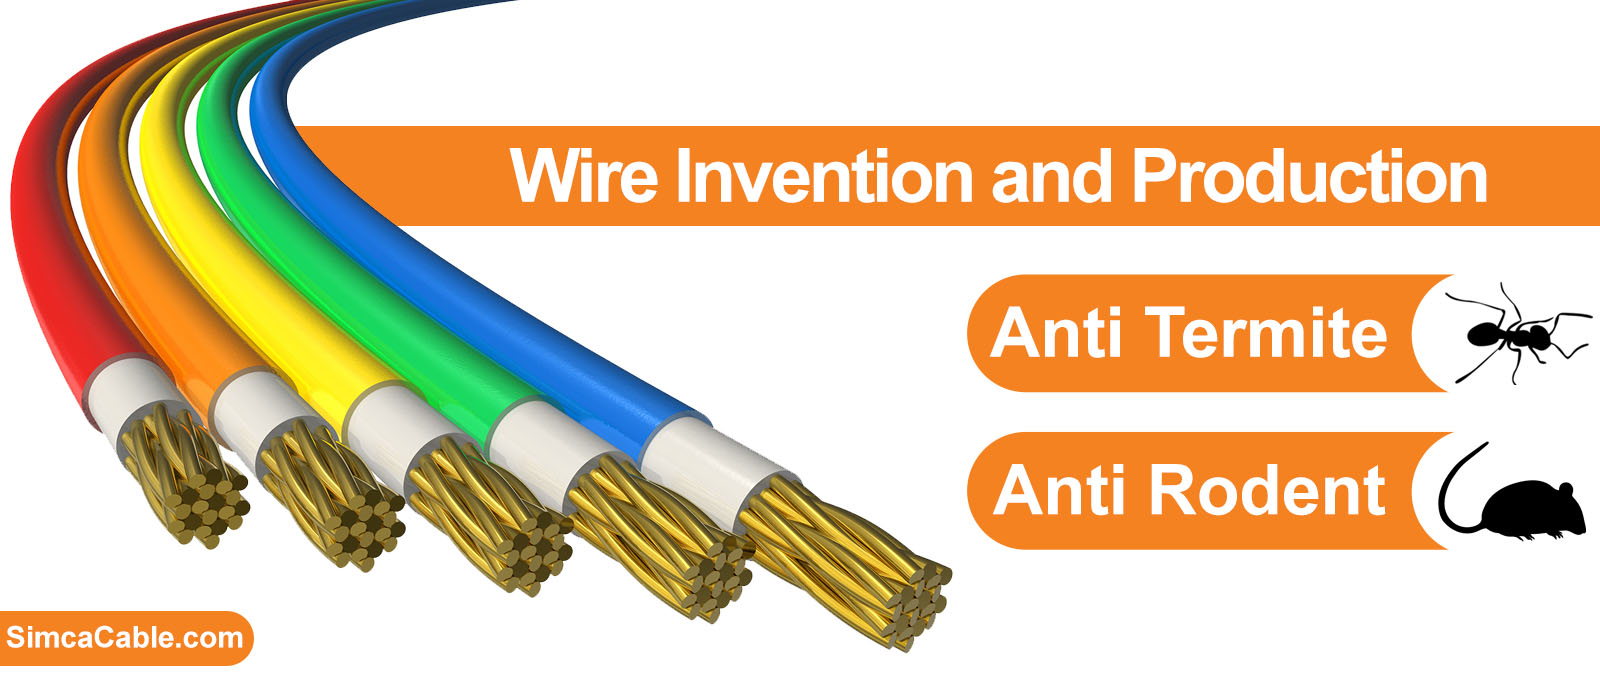 Invention and Production of Anti Termite and Anti Rodent Wire